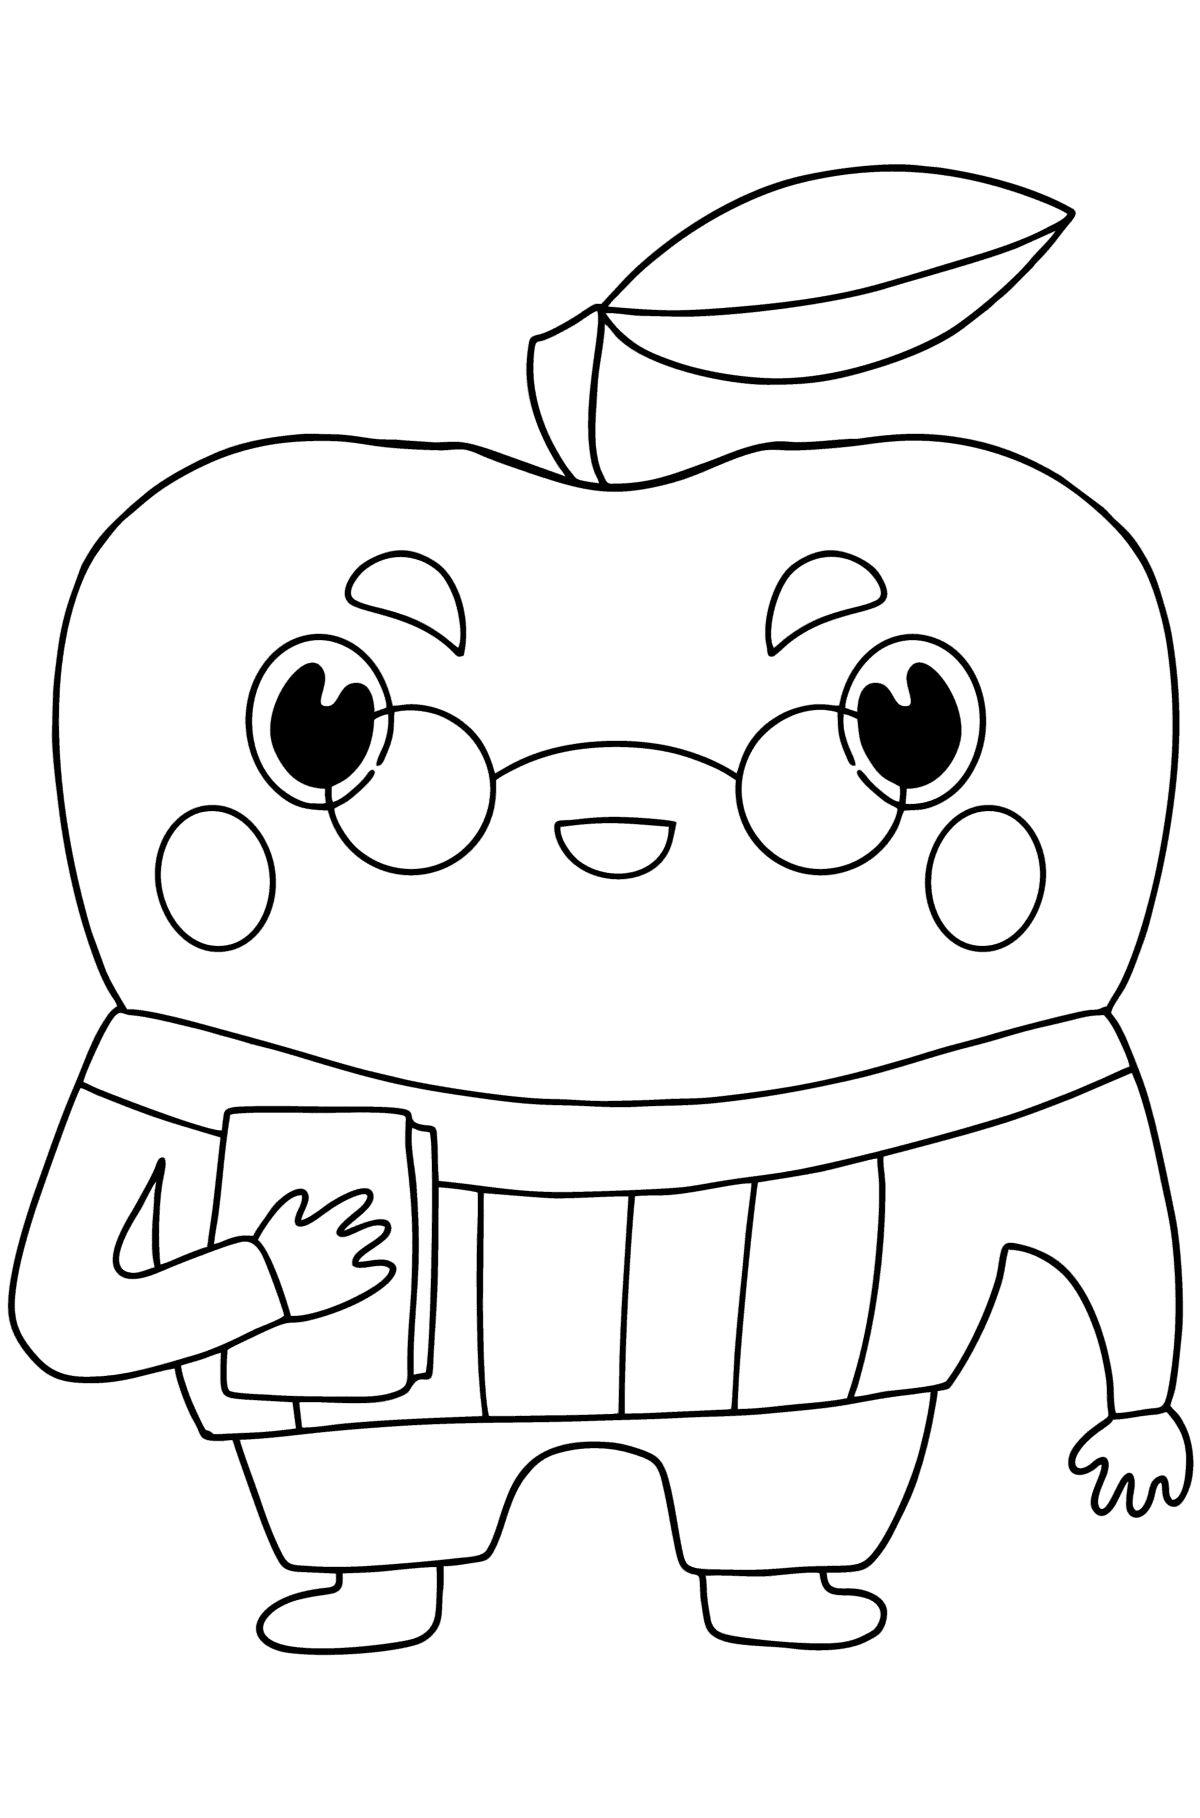 Apple intelligent сoloring page - Coloring Pages for Kids